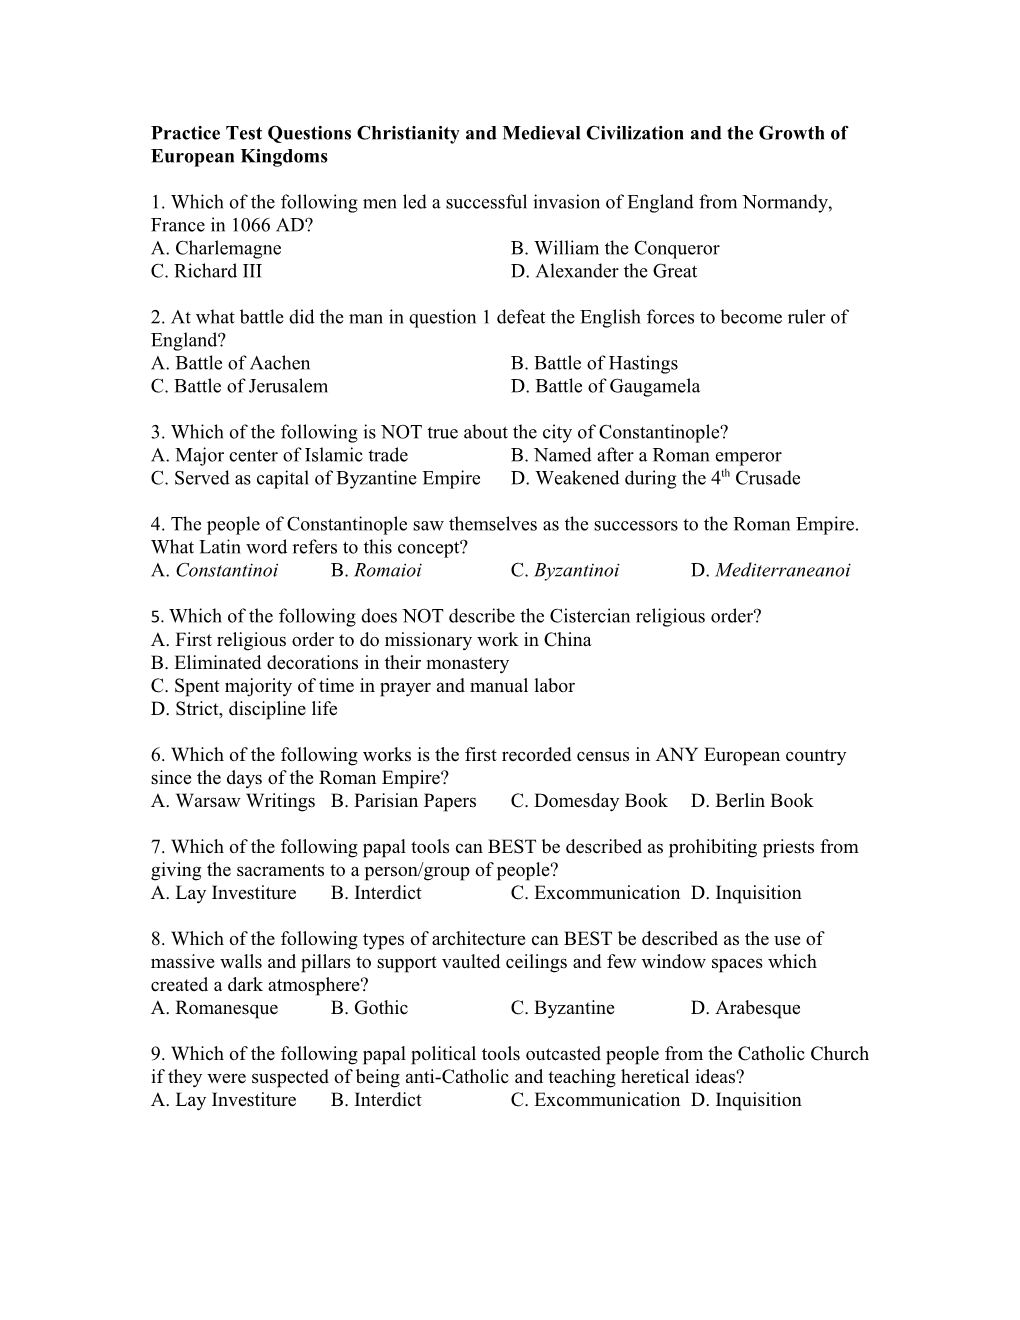 Practice Test Questions Christianity and Medieval Civilization and the Growth of European